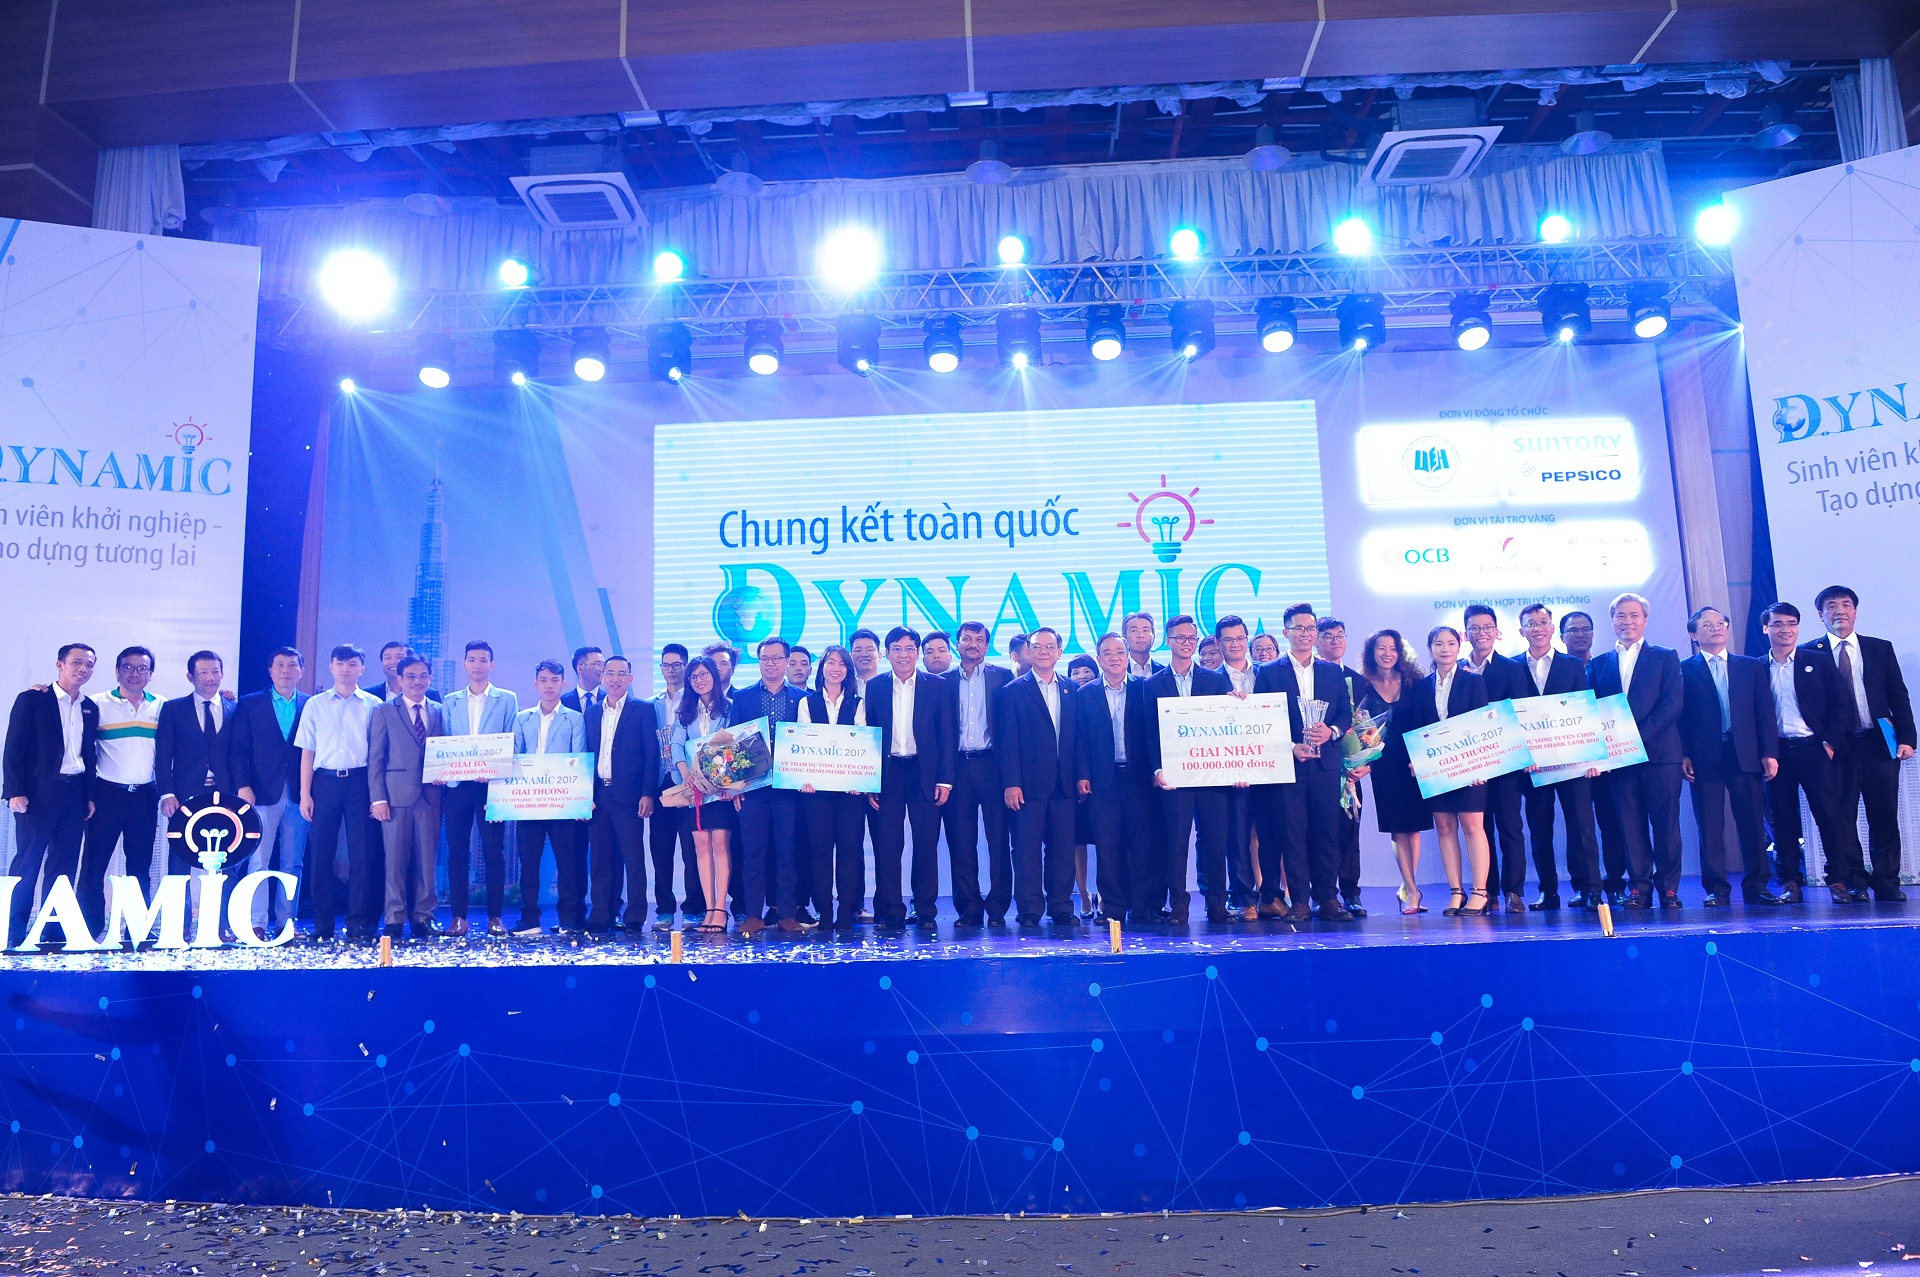 Newly-crowned Champion of Dynamic Competition 2017 - Desire to bring the “Made in Vietnam” brand into the world market